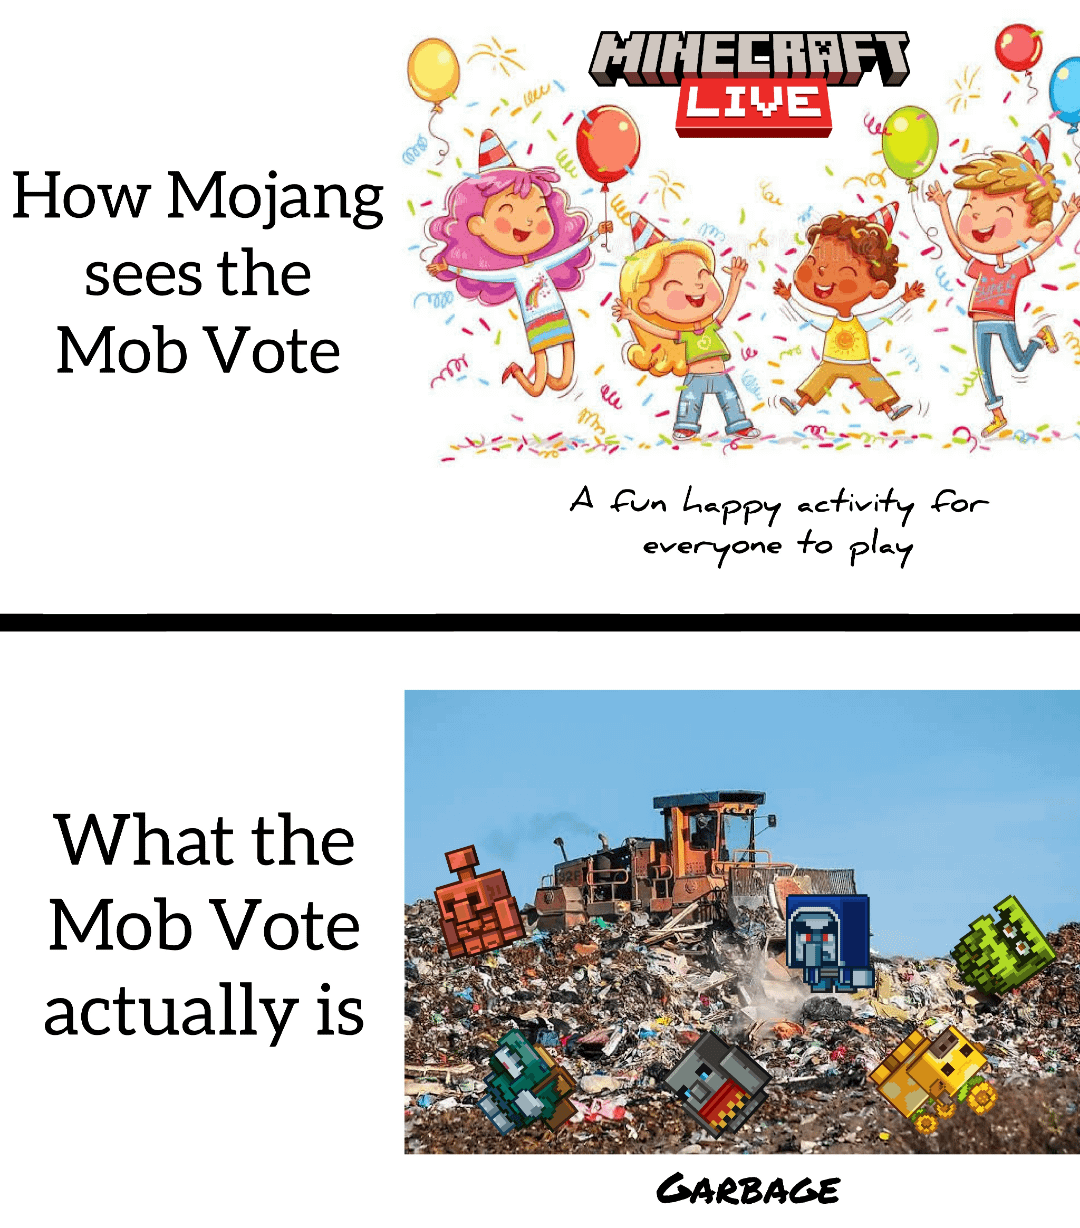 Minecraft Memes - How Mojang sees the Mob Vote